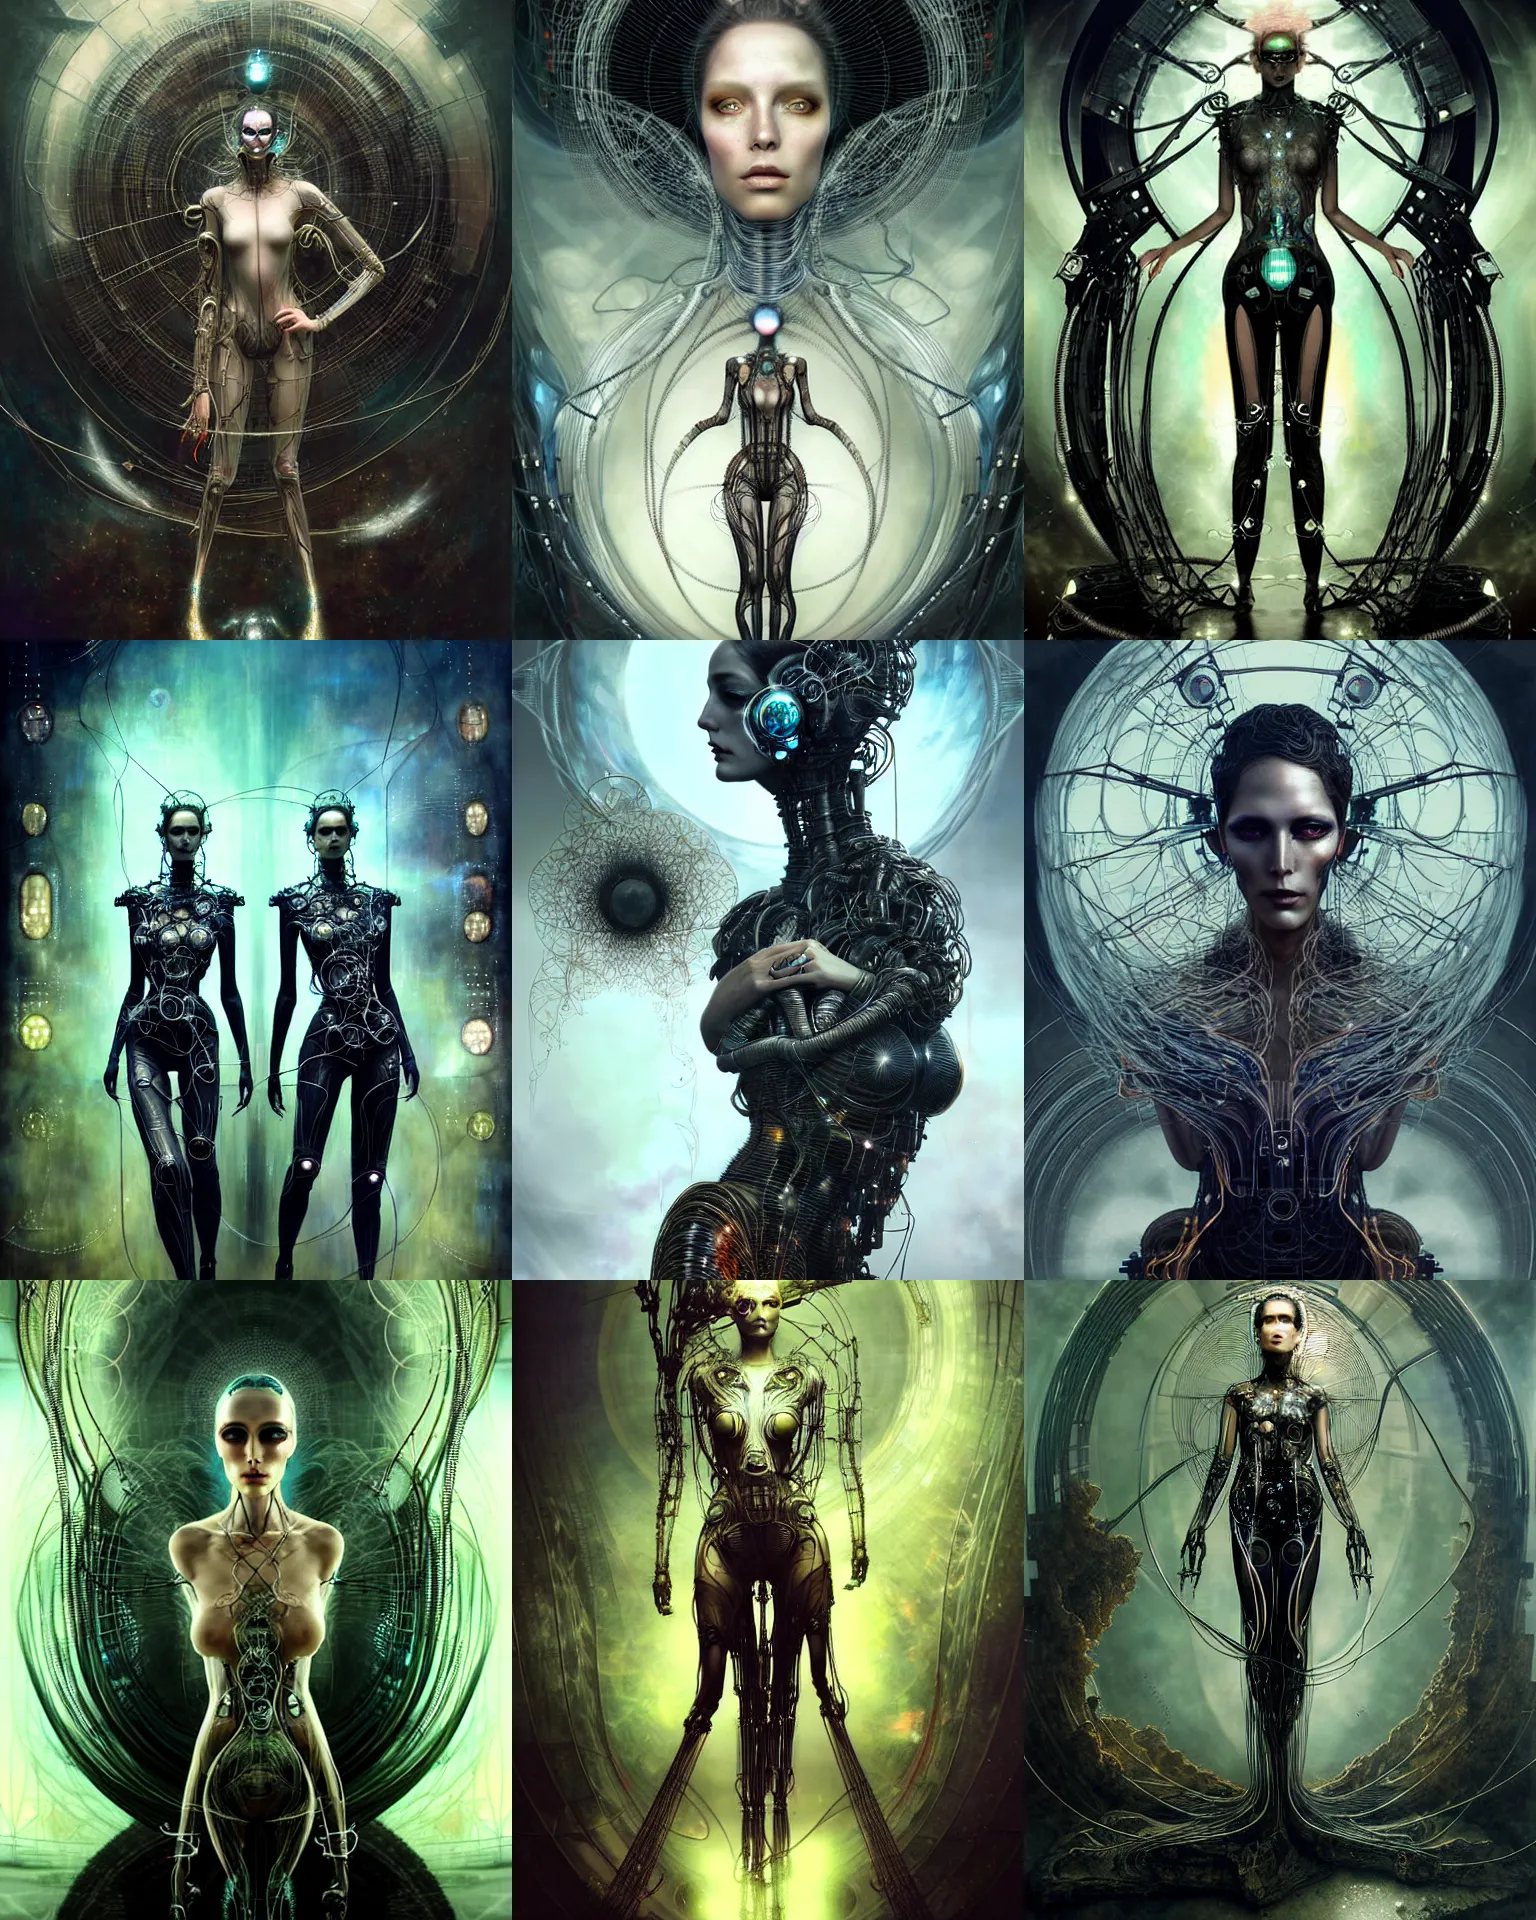 Prompt: karol bak and tom bagshaw and bastien lecouffe - deharme full body character portrait of a supermodel as the borg queen, glitchcore rebirth, floating in a powerful zen state, beautiful and ominous, wearing combination of mecha and bodysuit made of wires and etched ceramic, machinery enveloping nature in the background, scifi character render